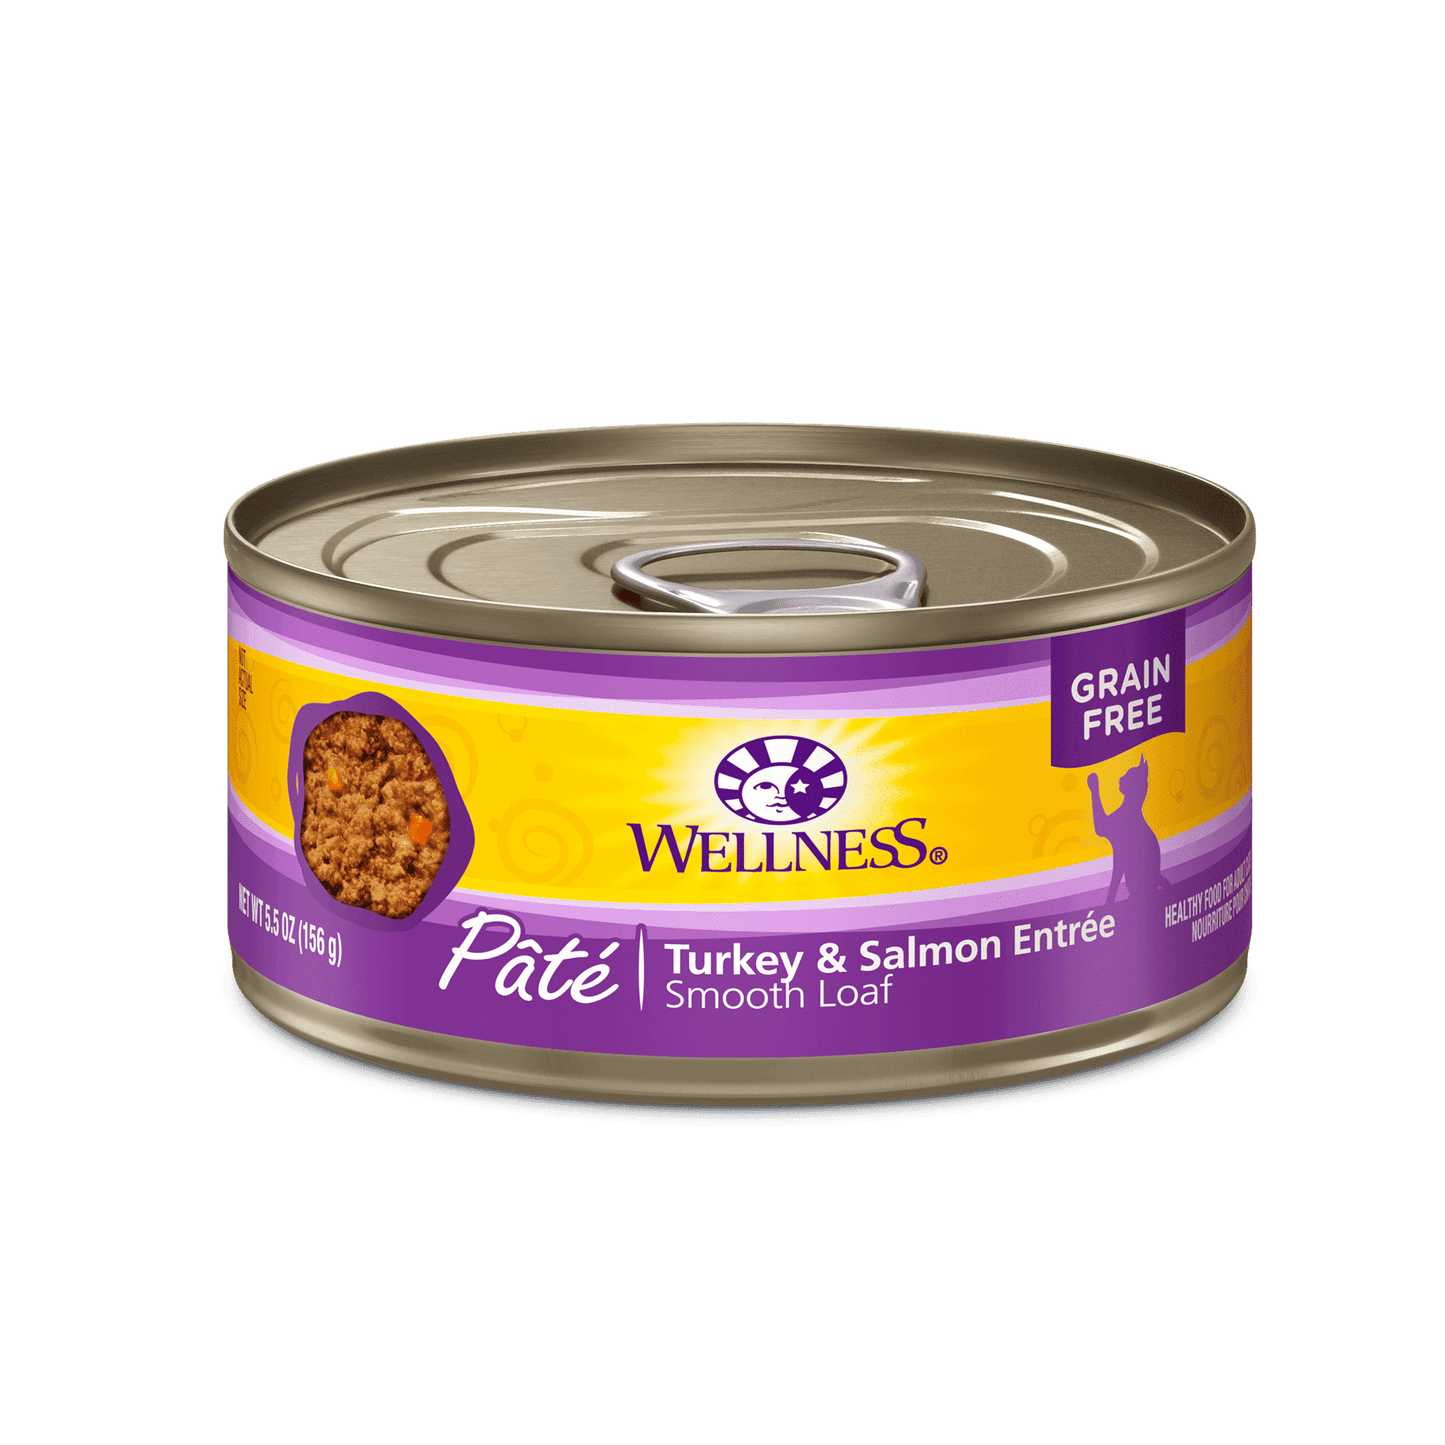 Wellness Complete Health Turkey & Salmon Formula Grain-Free Canned Cat Food 155g Canned Cat Food 155g | PetMax Canada